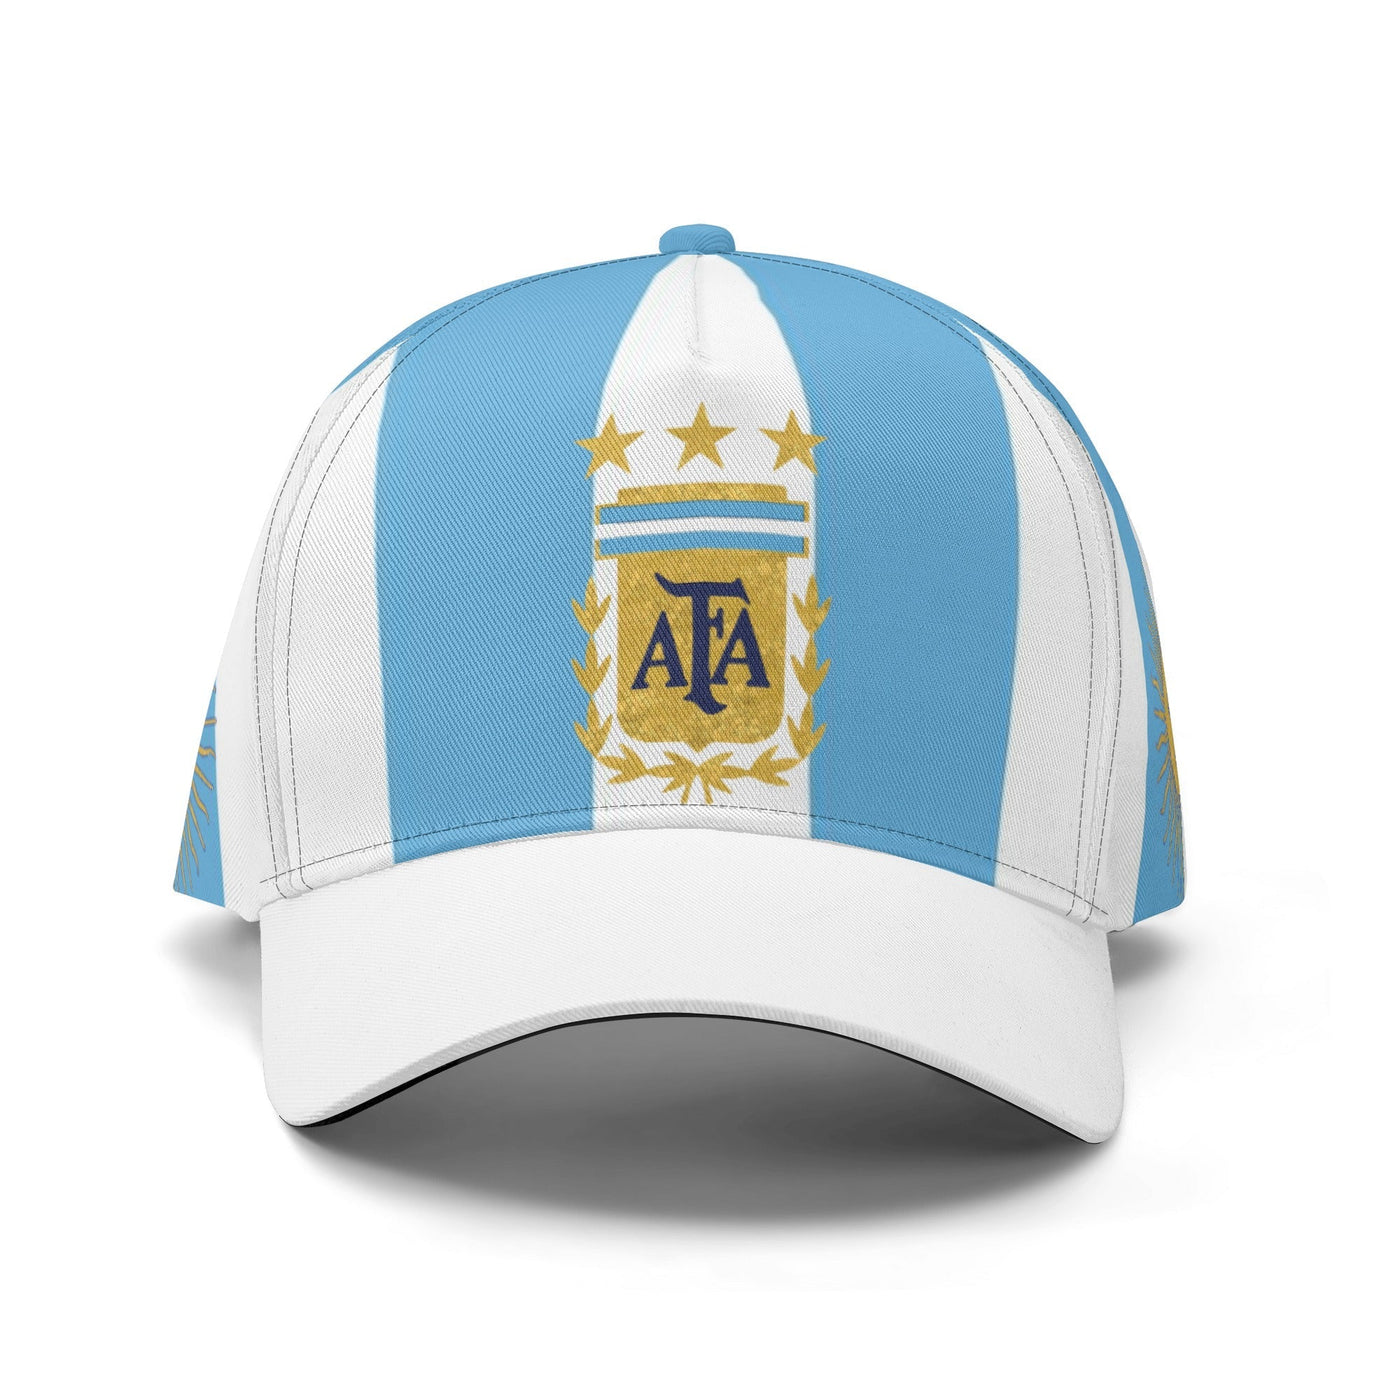 Argentina Hat Soccer World Cup